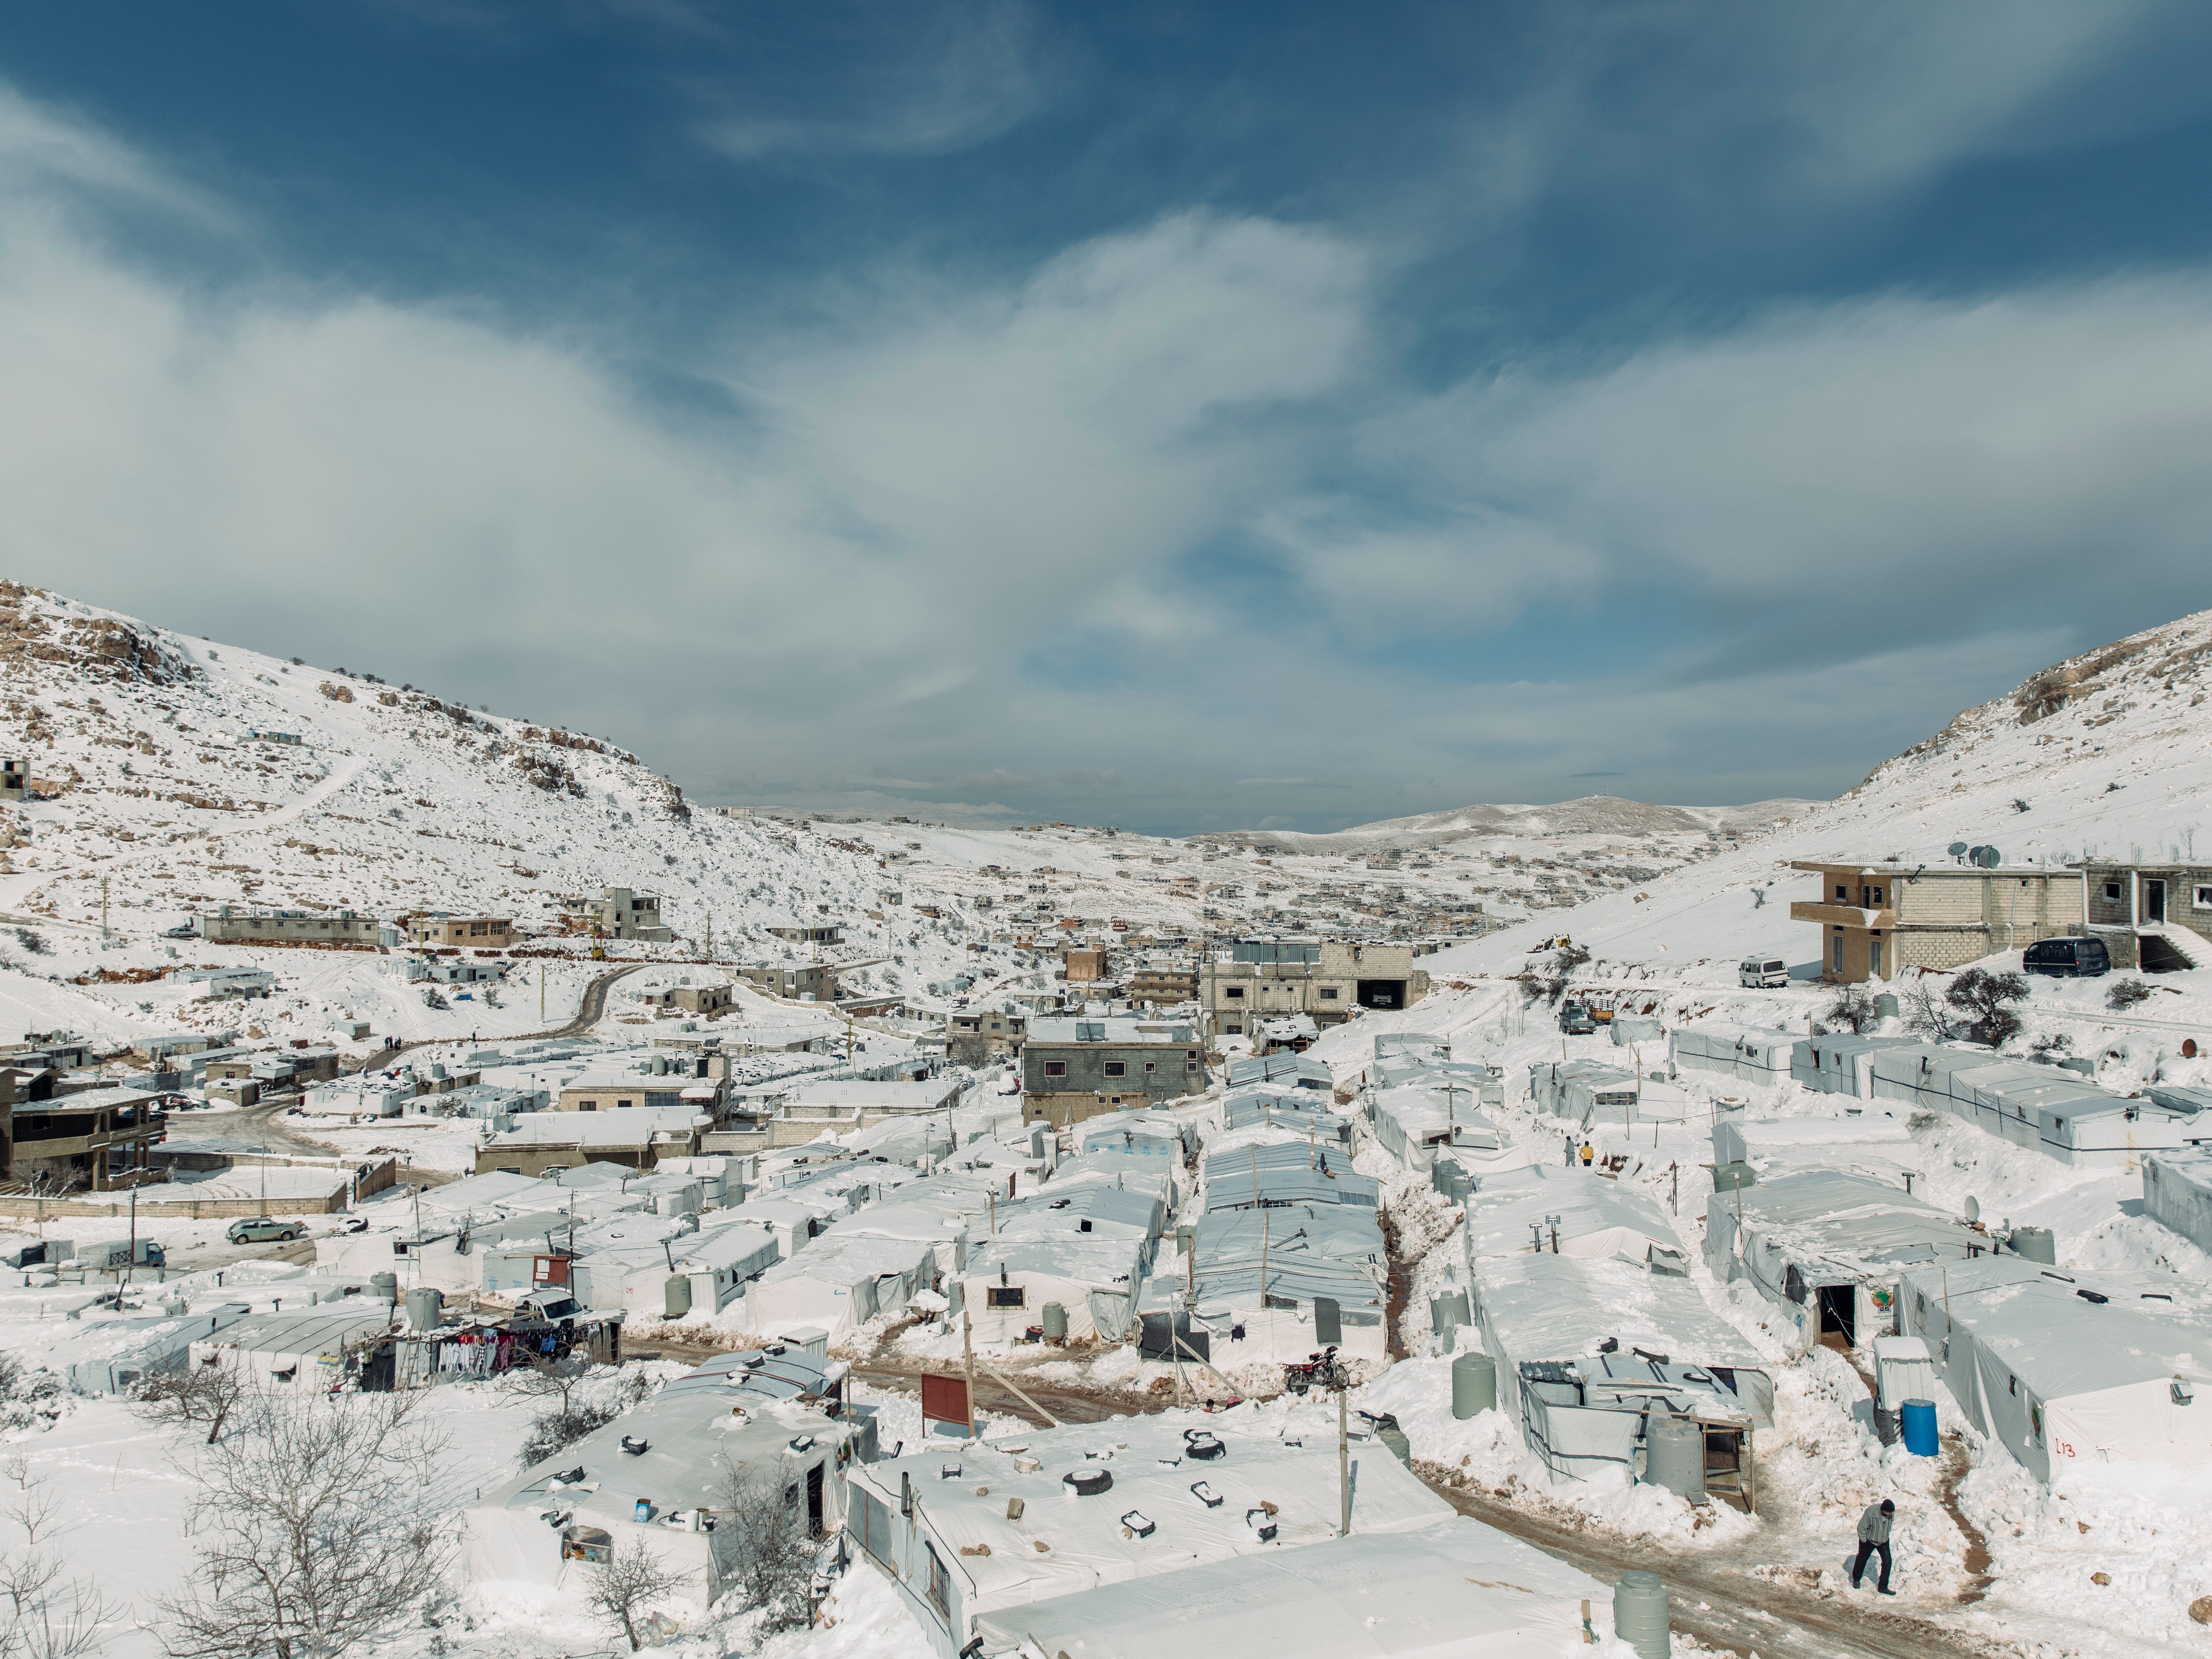 Snow in Arsal, Lebanon, home to 39,000 Syrian refugees displaced by civil war according to UNHCR in December 2019